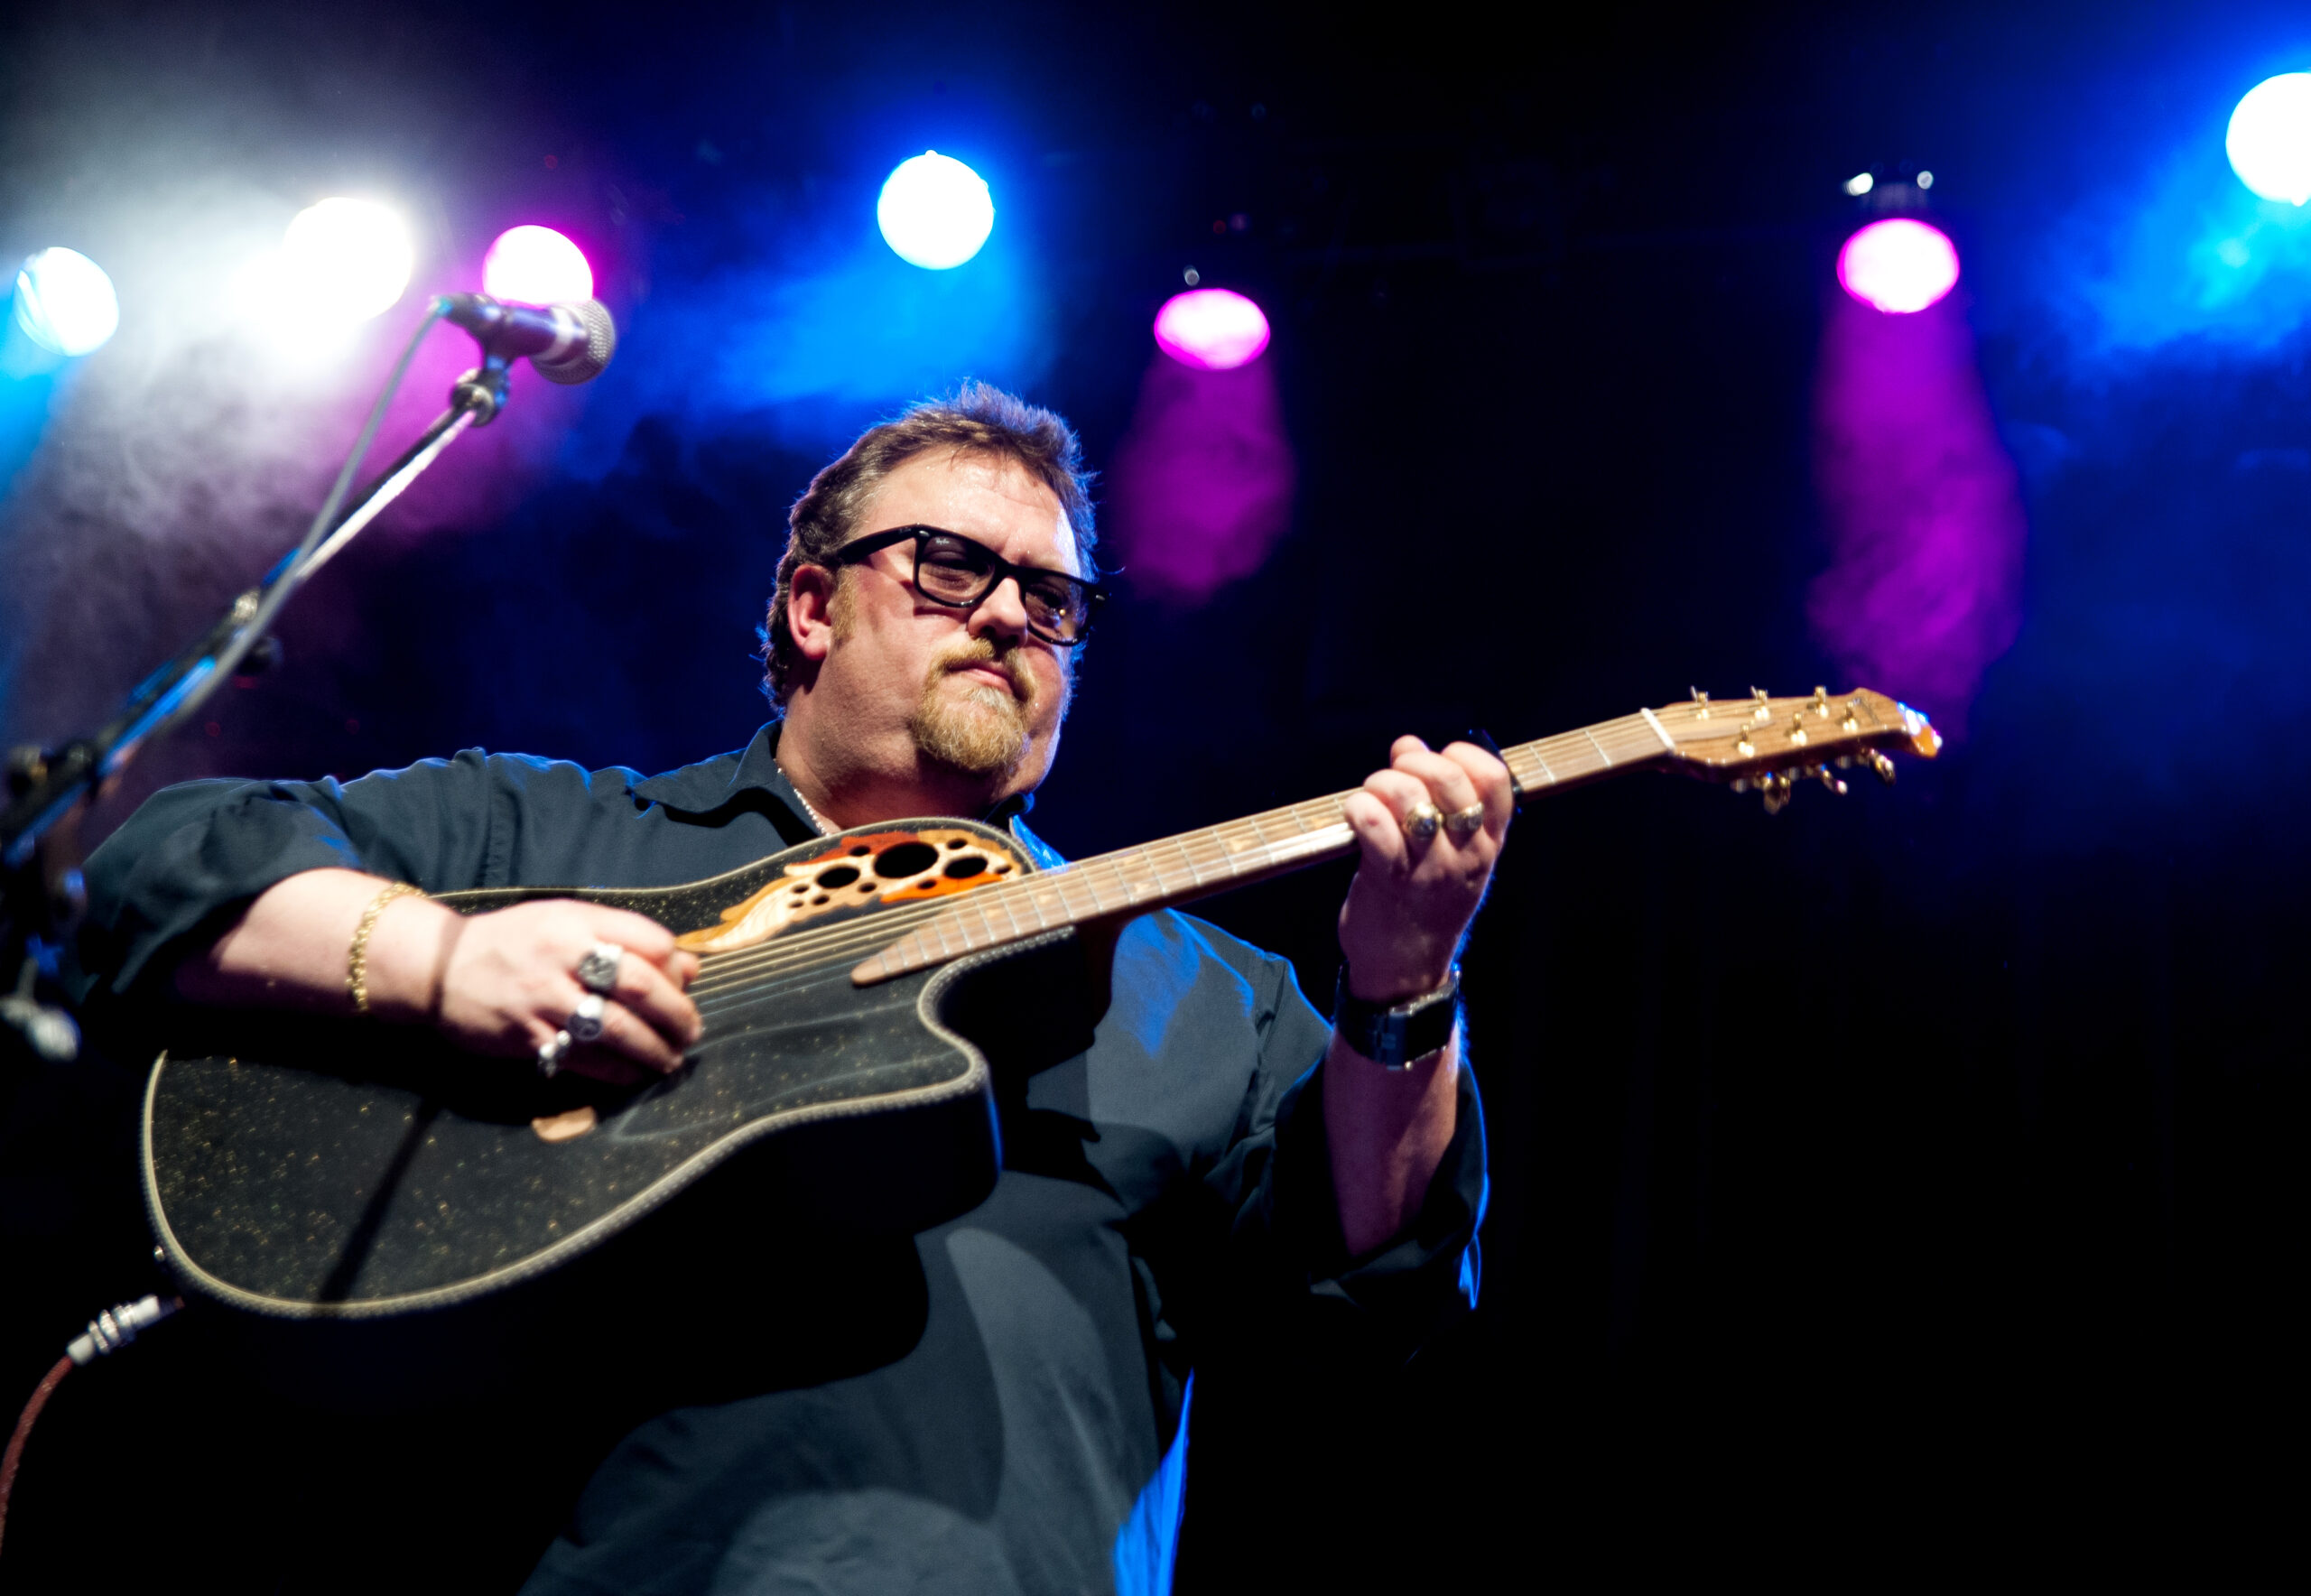 J.P. Cormier playing a guitar on stage with blue and purple lighting